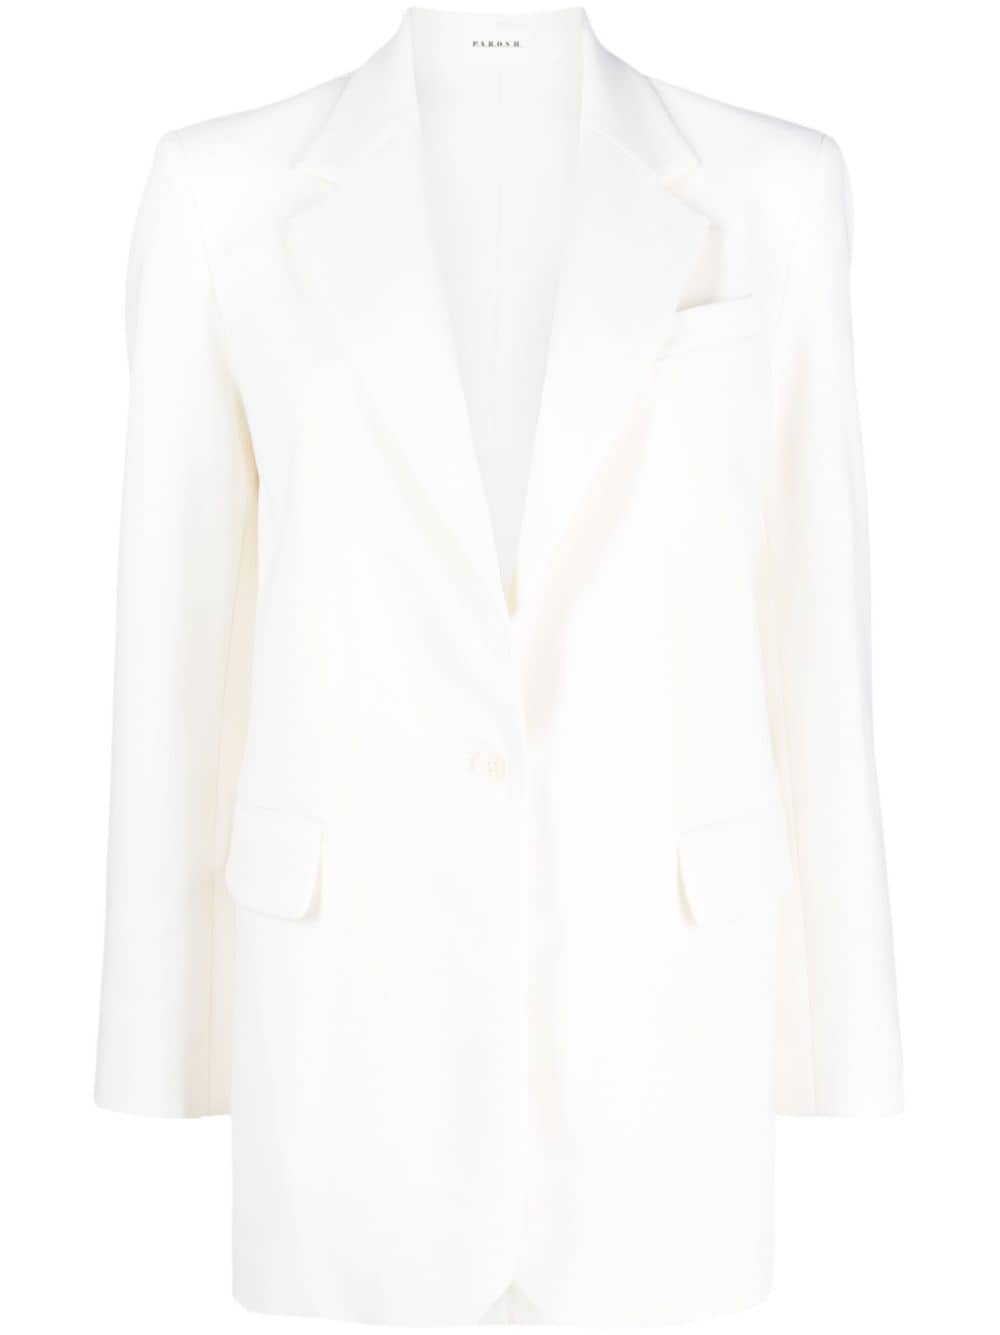 Image 1 of P.A.R.O.S.H. single-breasted wool-blend blazer